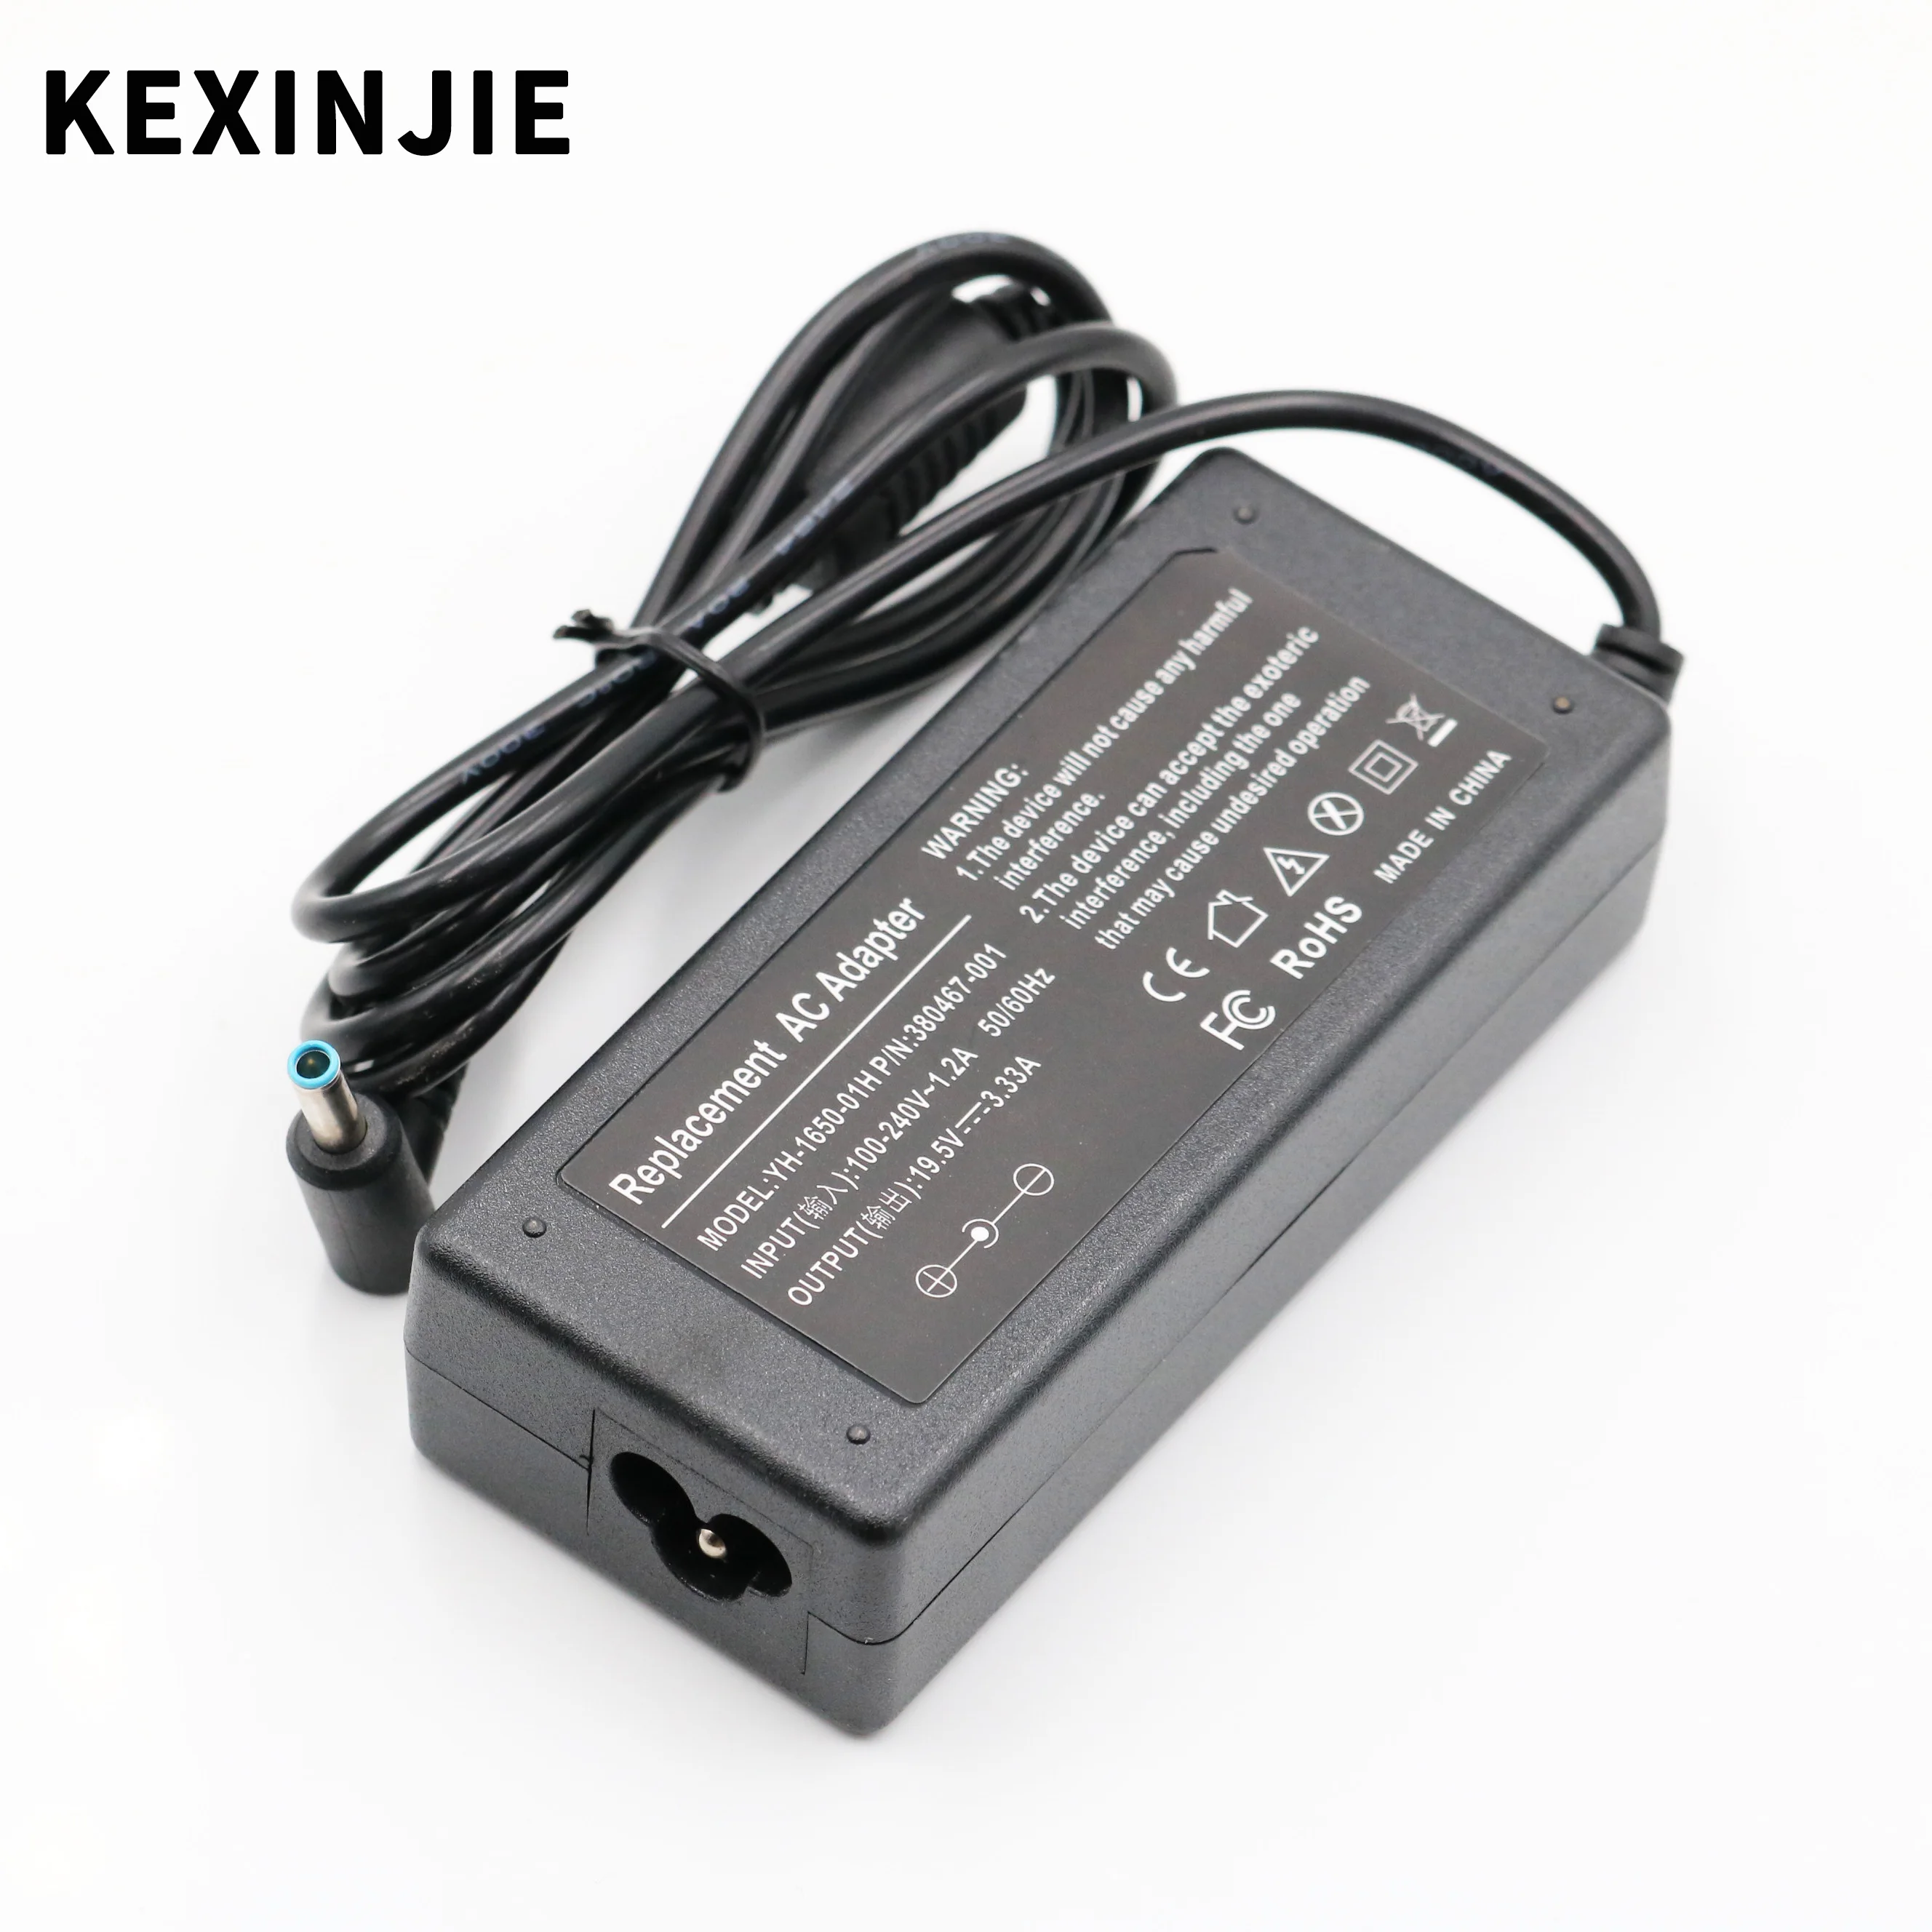 

Laptop AC power adapter charger for HP EliteBook 725 745 750 755 850 G3 820 G3 840 G3 Series AC Adapter 65W 19.5V 3.33A